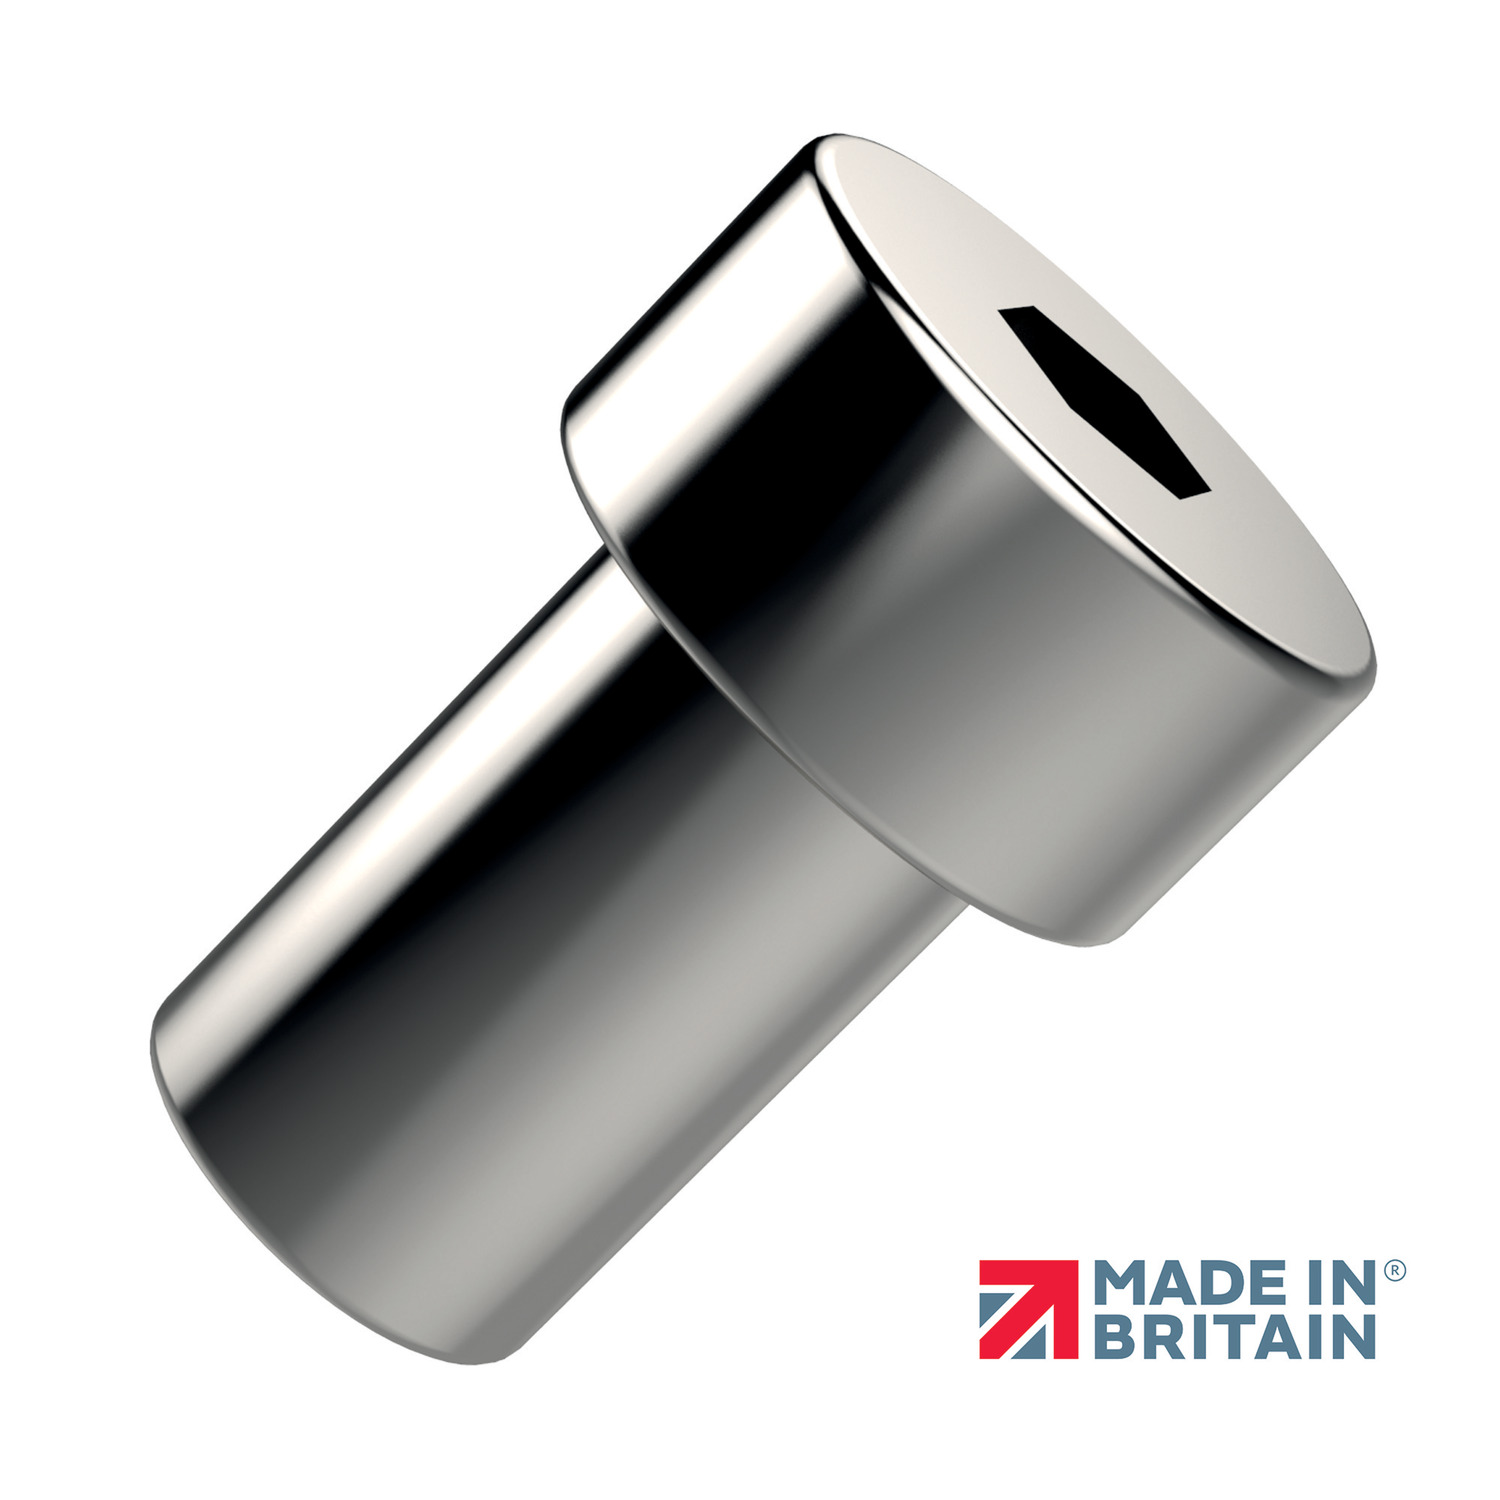 Shoulder Nuts - Cap Head New to our range, socket shoulder nuts in AISI 303 stainless steel. Also available in AISI 316 stainless steel.